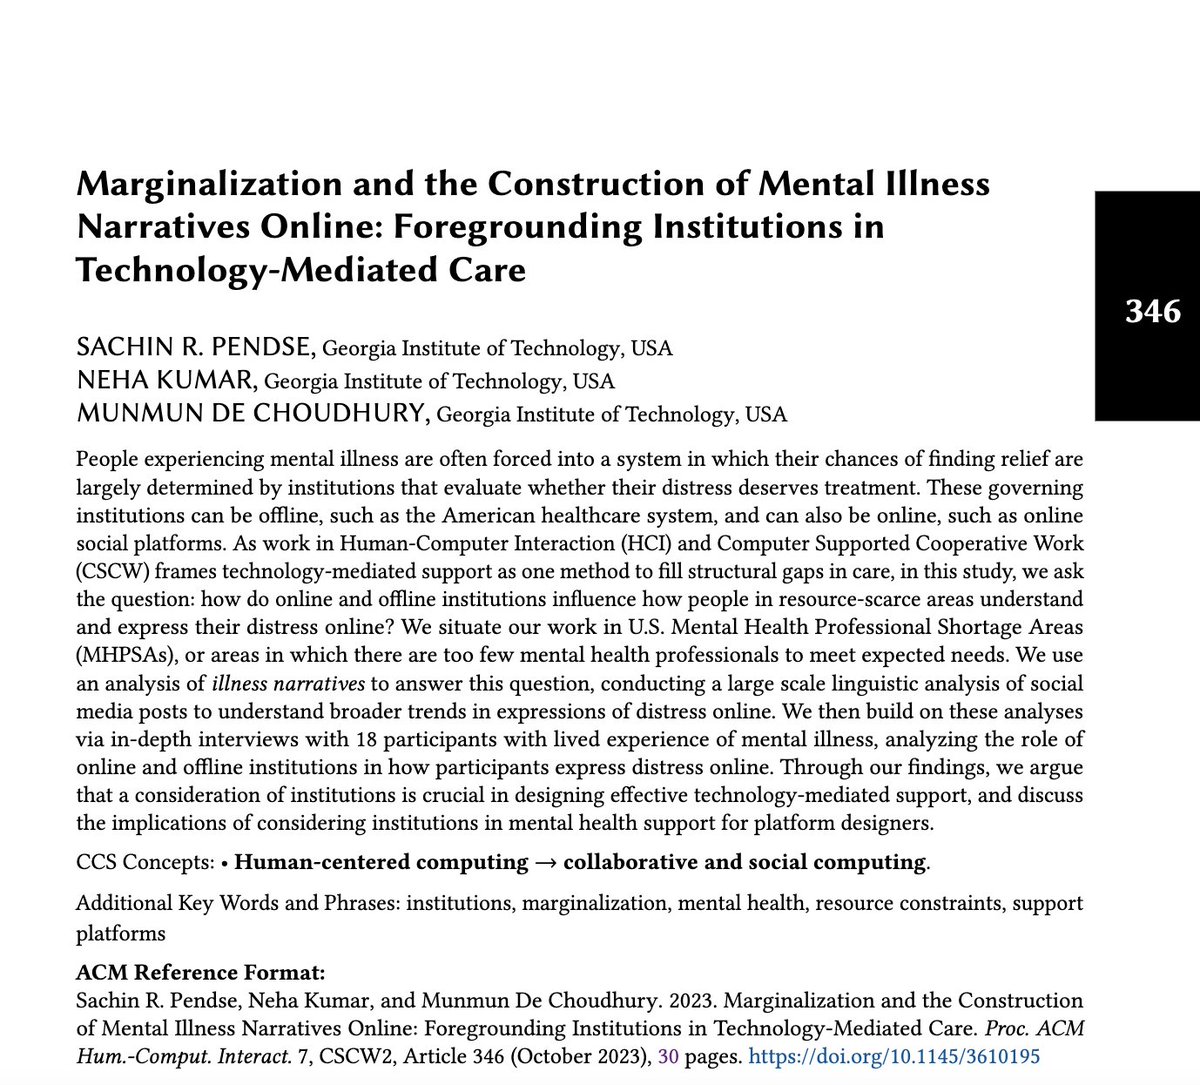 On online platforms, we see robust discussions + debates around mental health. 

How might these discussions influence experiences of illness, particularly for those in resource-scarce areas?

New mixed-methods #CSCW2023 work w/ @nehakumar @munmun10 🧵

illnessnarratives.sachinpendse.in